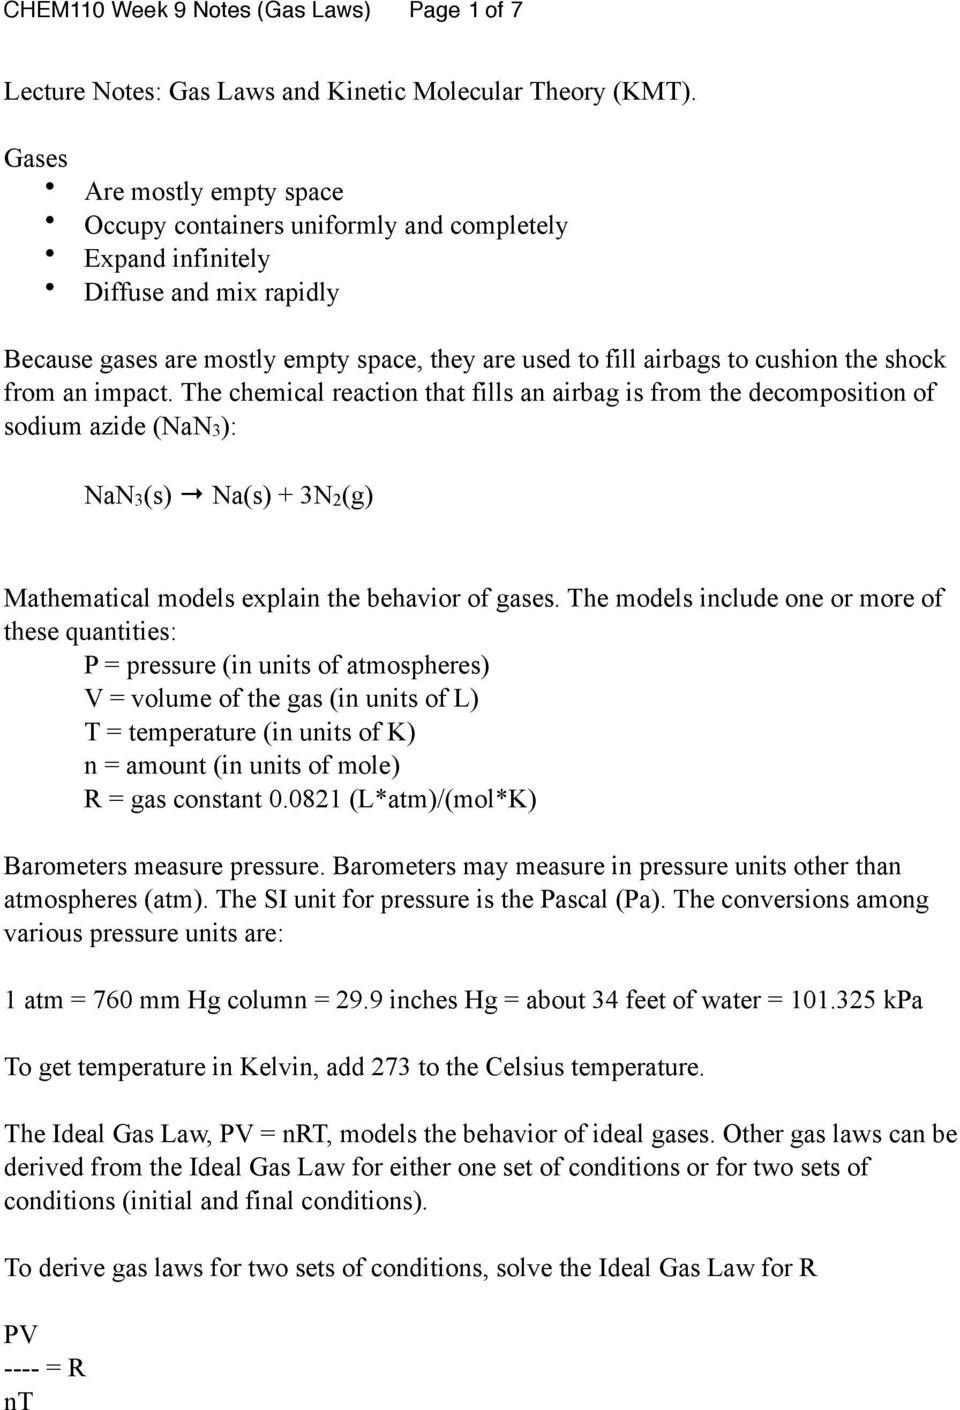 Kinetic Molecular theory Worksheet Lecture Notes Gas Laws and Kinetic Molecular theory Kmt